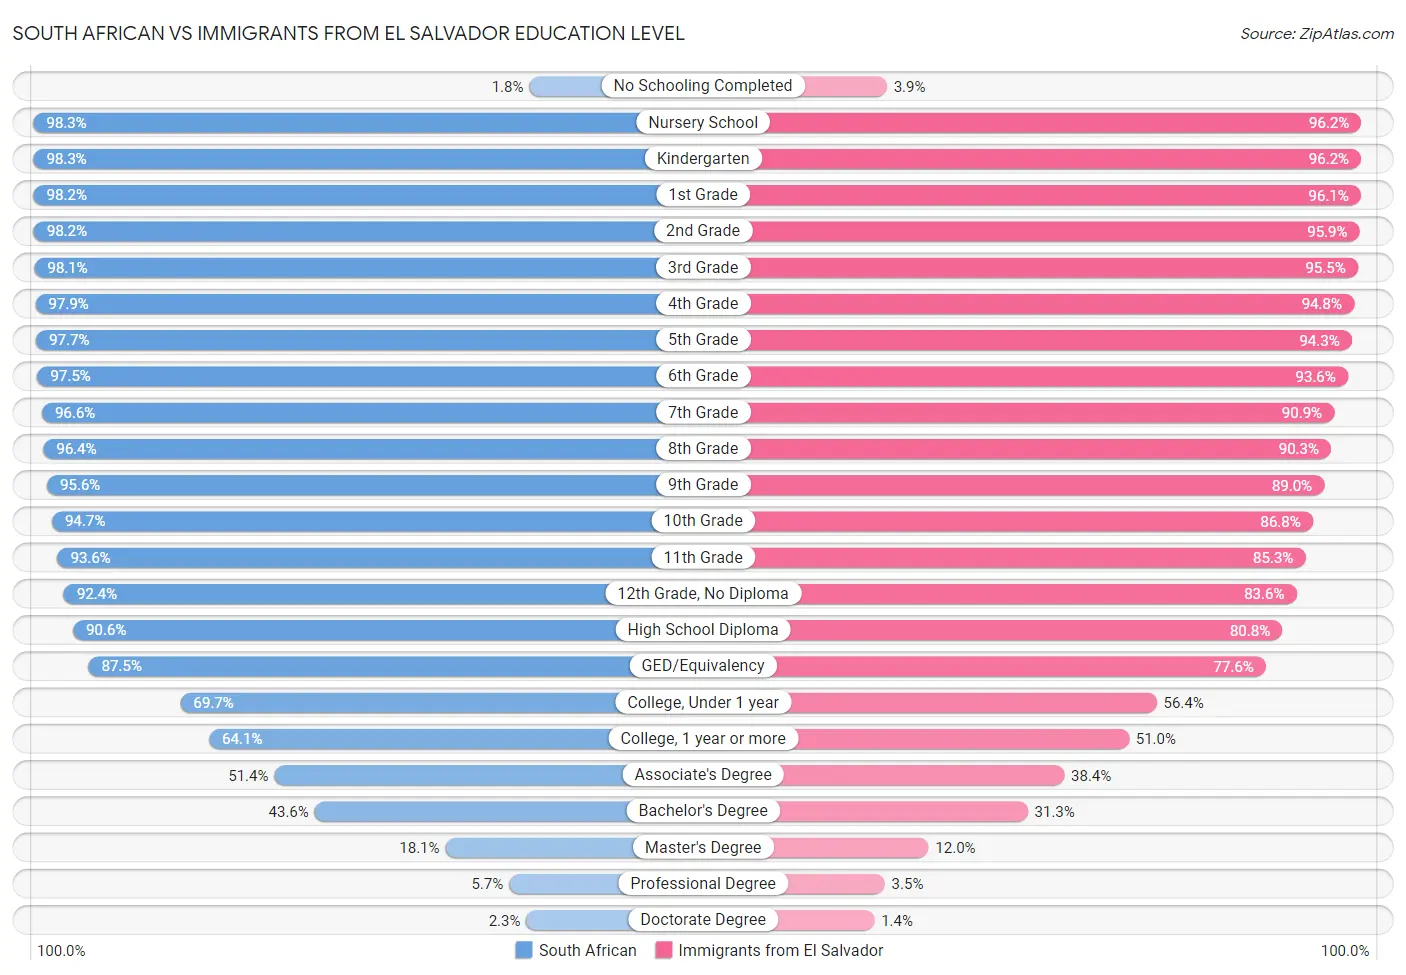 South African vs Immigrants from El Salvador Education Level